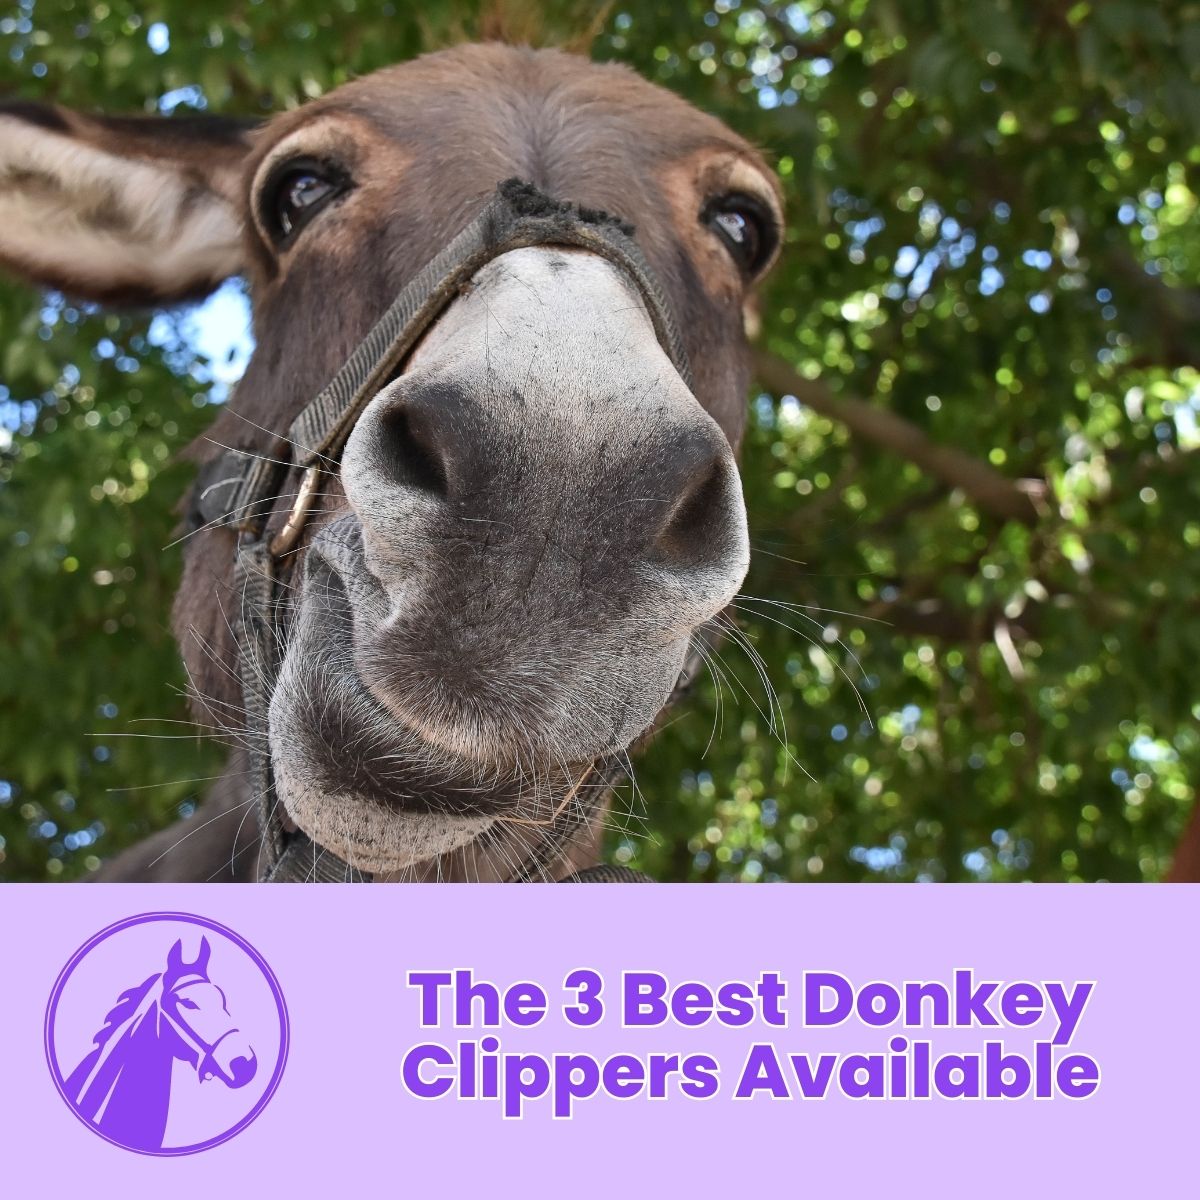 You are currently viewing The 3 Best Donkey Clippers Available